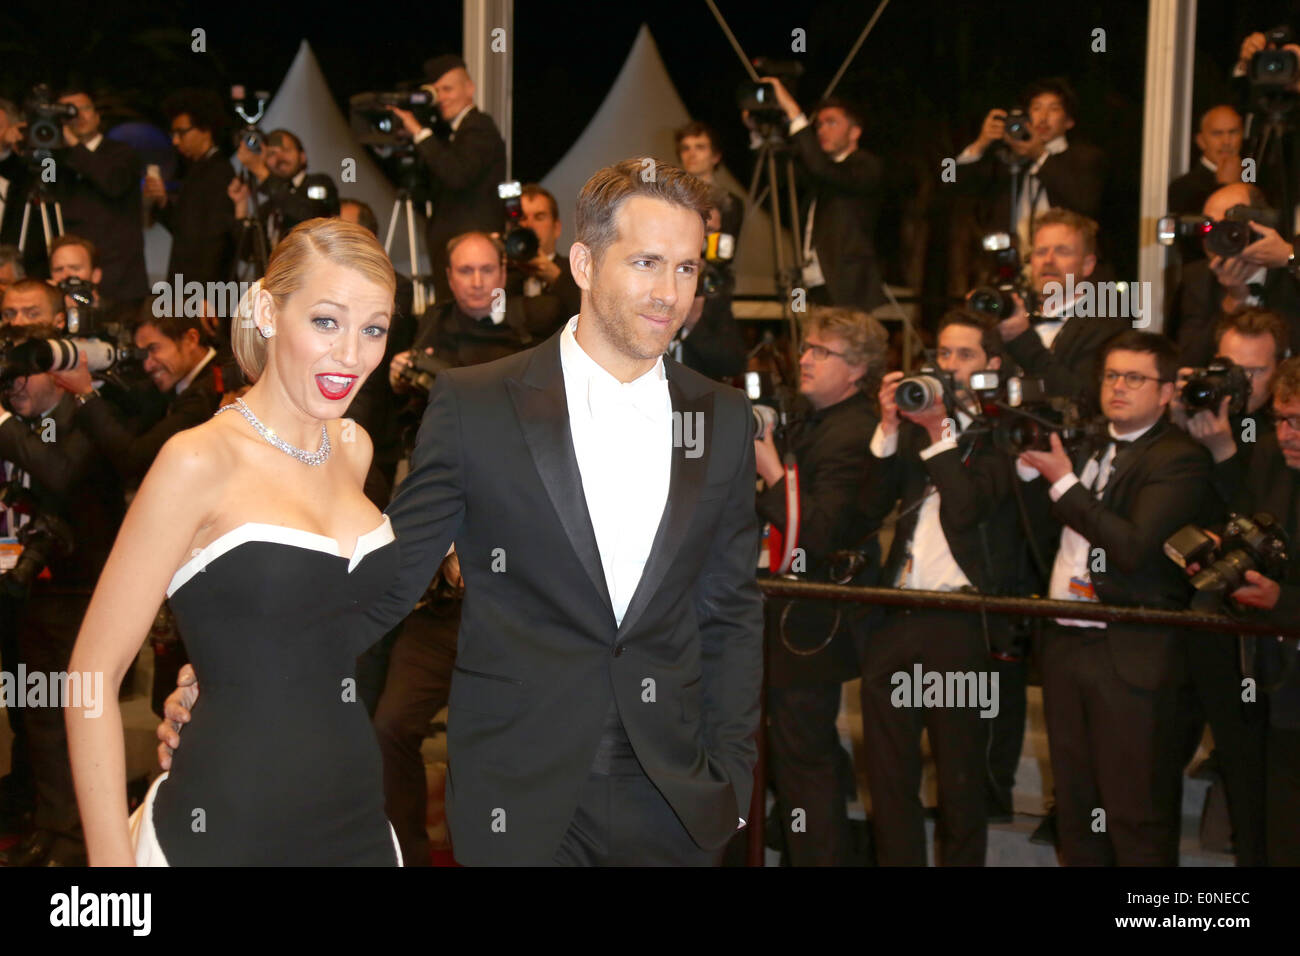 Ryan Reynolds film 'The Captive' booed at Cannes 